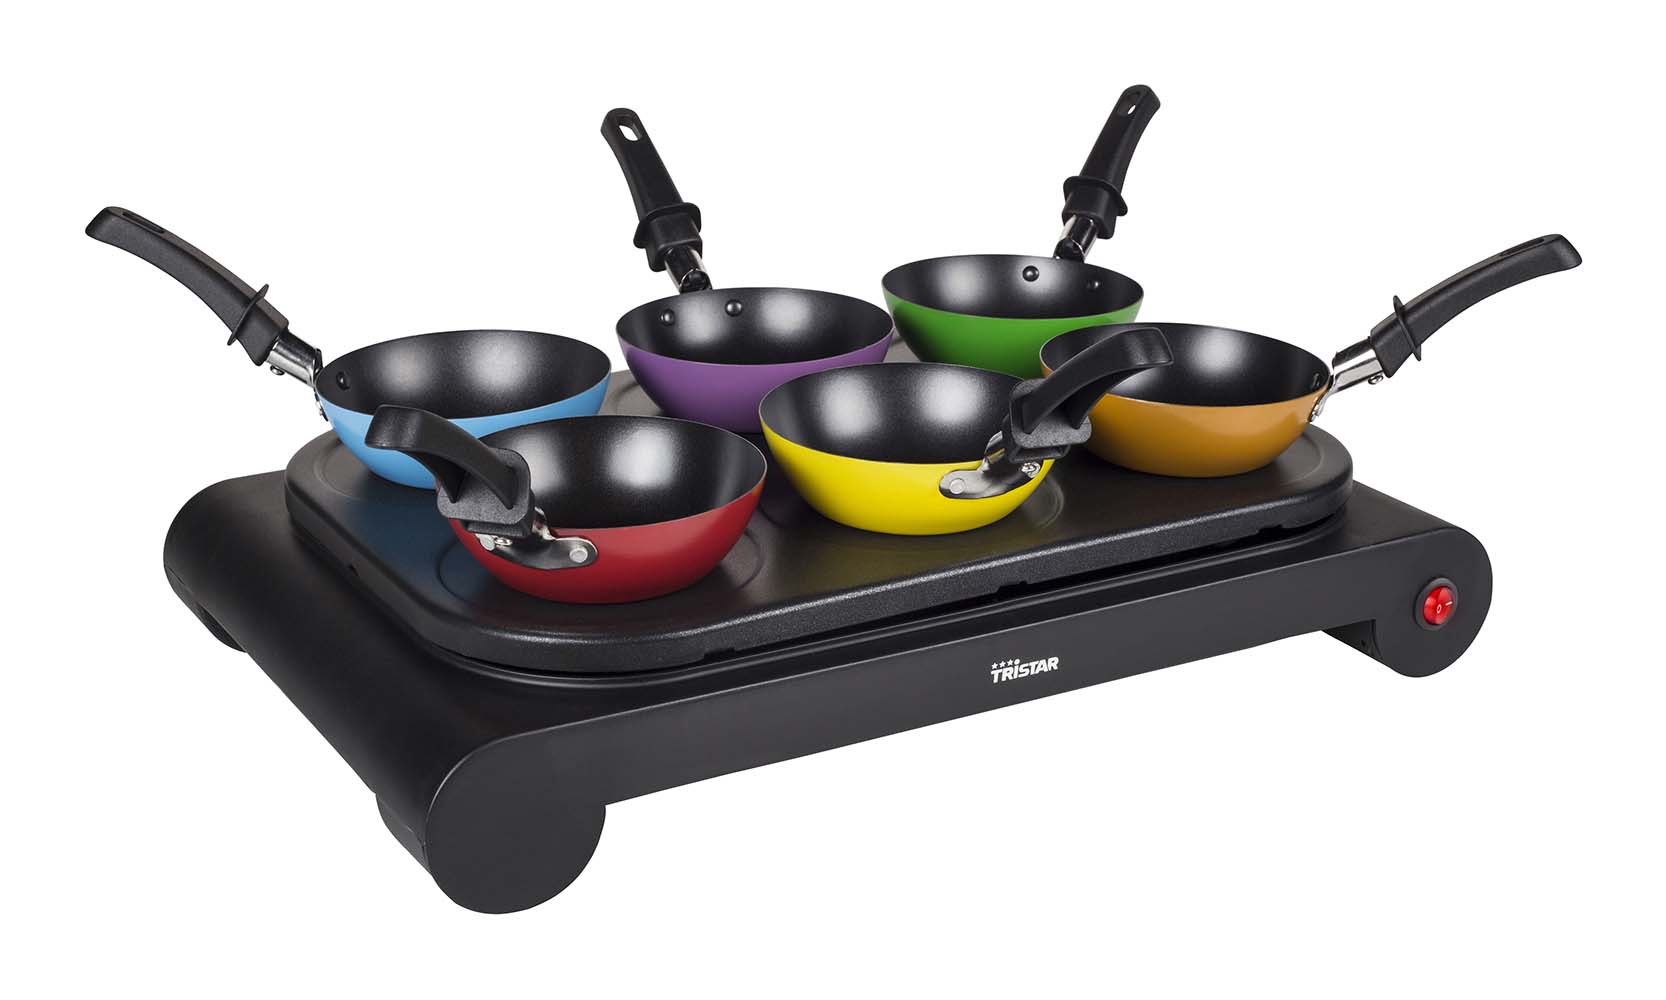 8500506 Attractive and fashionable wok set. This set includes 6 small coloured woks, 6 spatulas. The wok set can also be used without the wok pans as a crepe pan (6 pieces) or as a baking sheet. The many uses and compact dimensions make this set ideal for travelling. 230 V and 1000 W